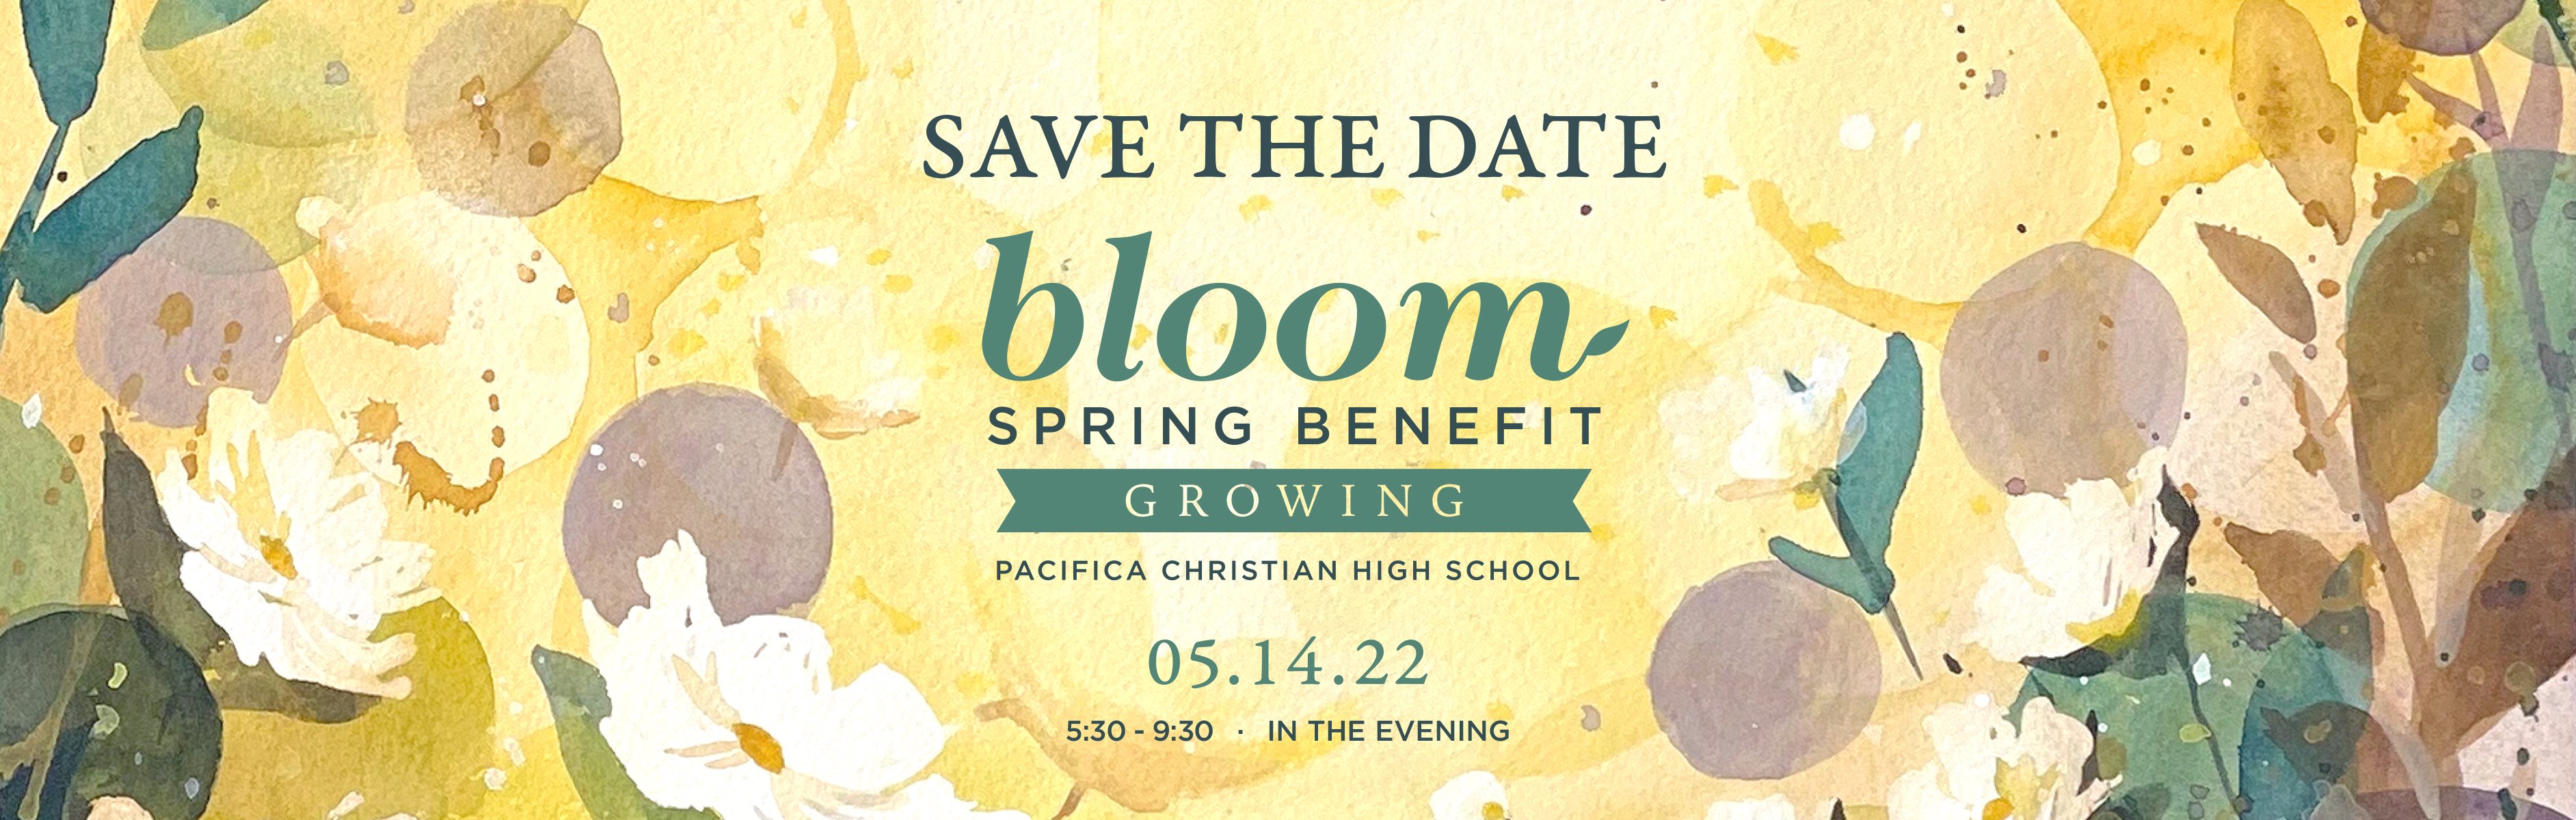 Save the Date for Bloom - May 14, 2022!